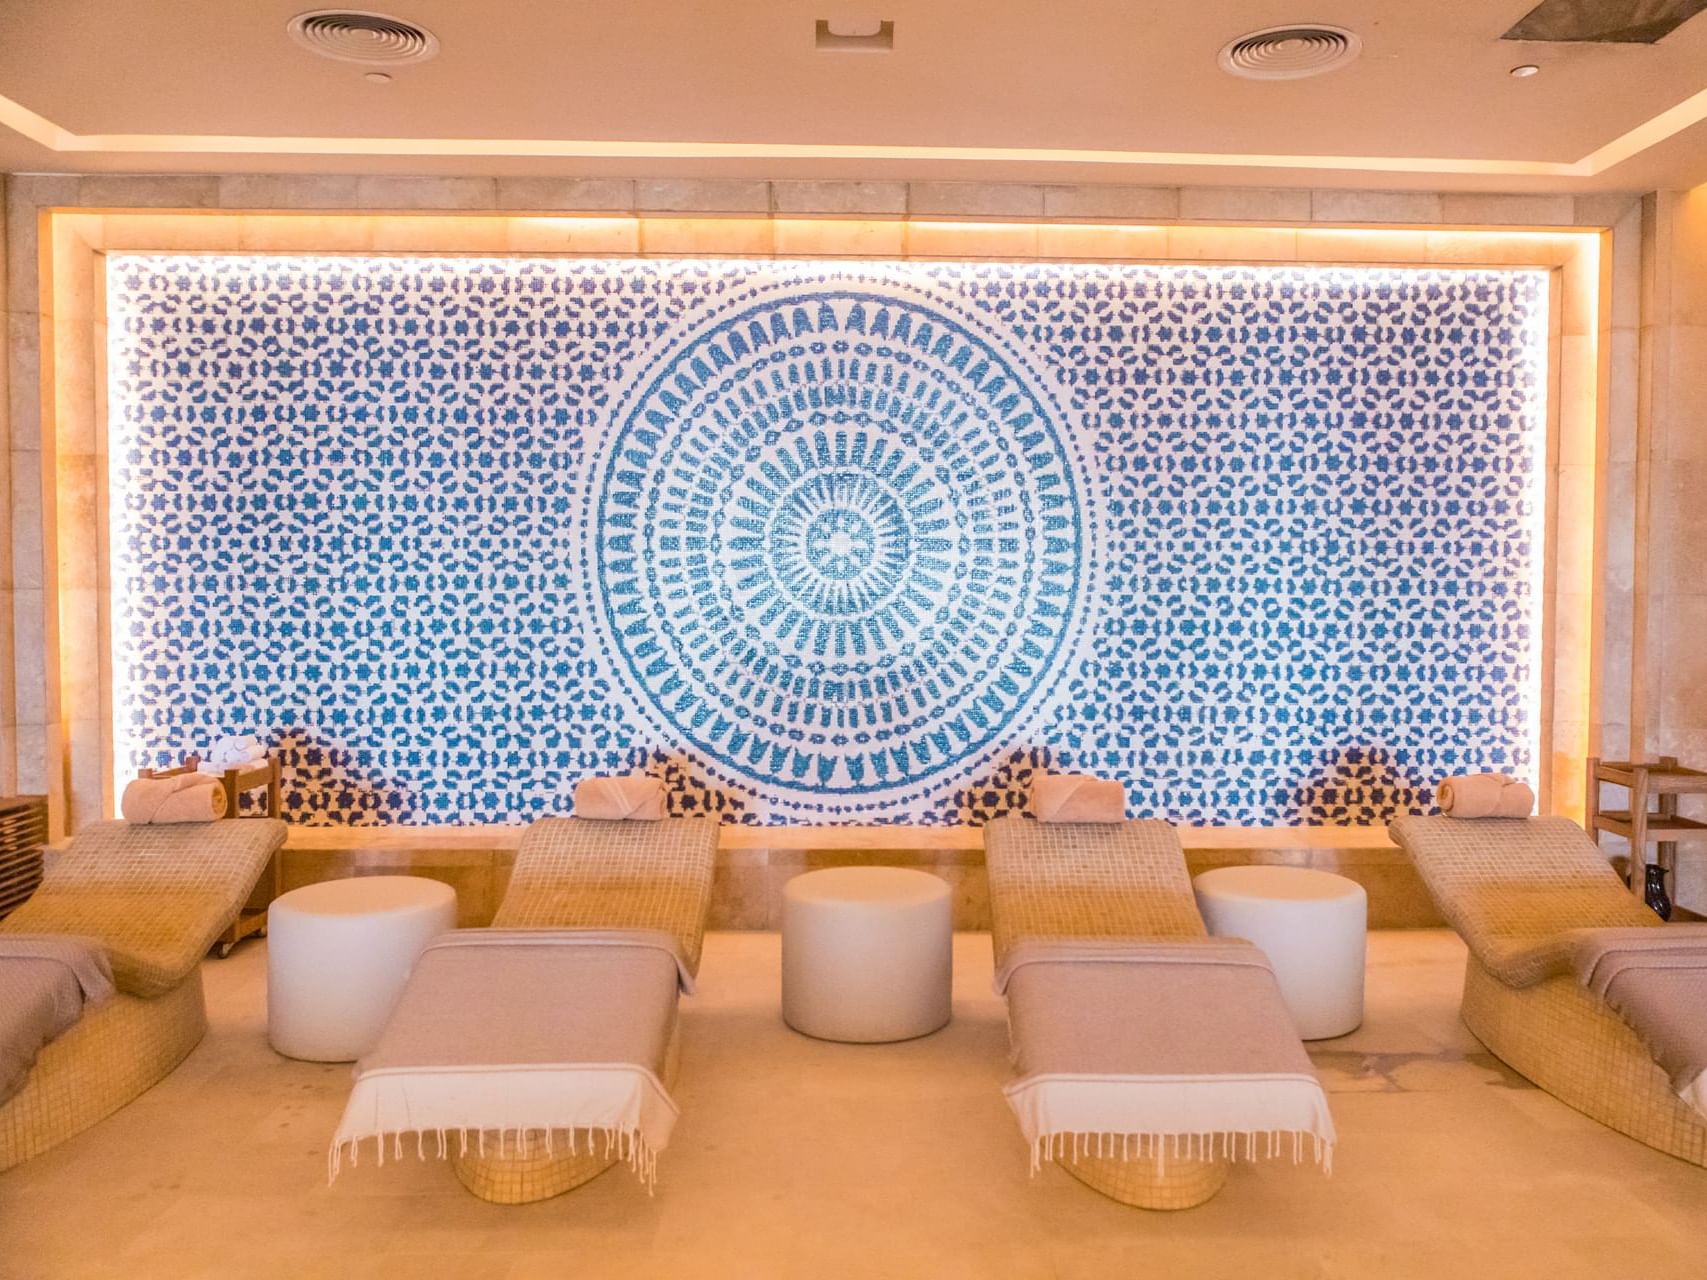 Interior of spa at haven Riviera Cancun with spa beds & wall decor